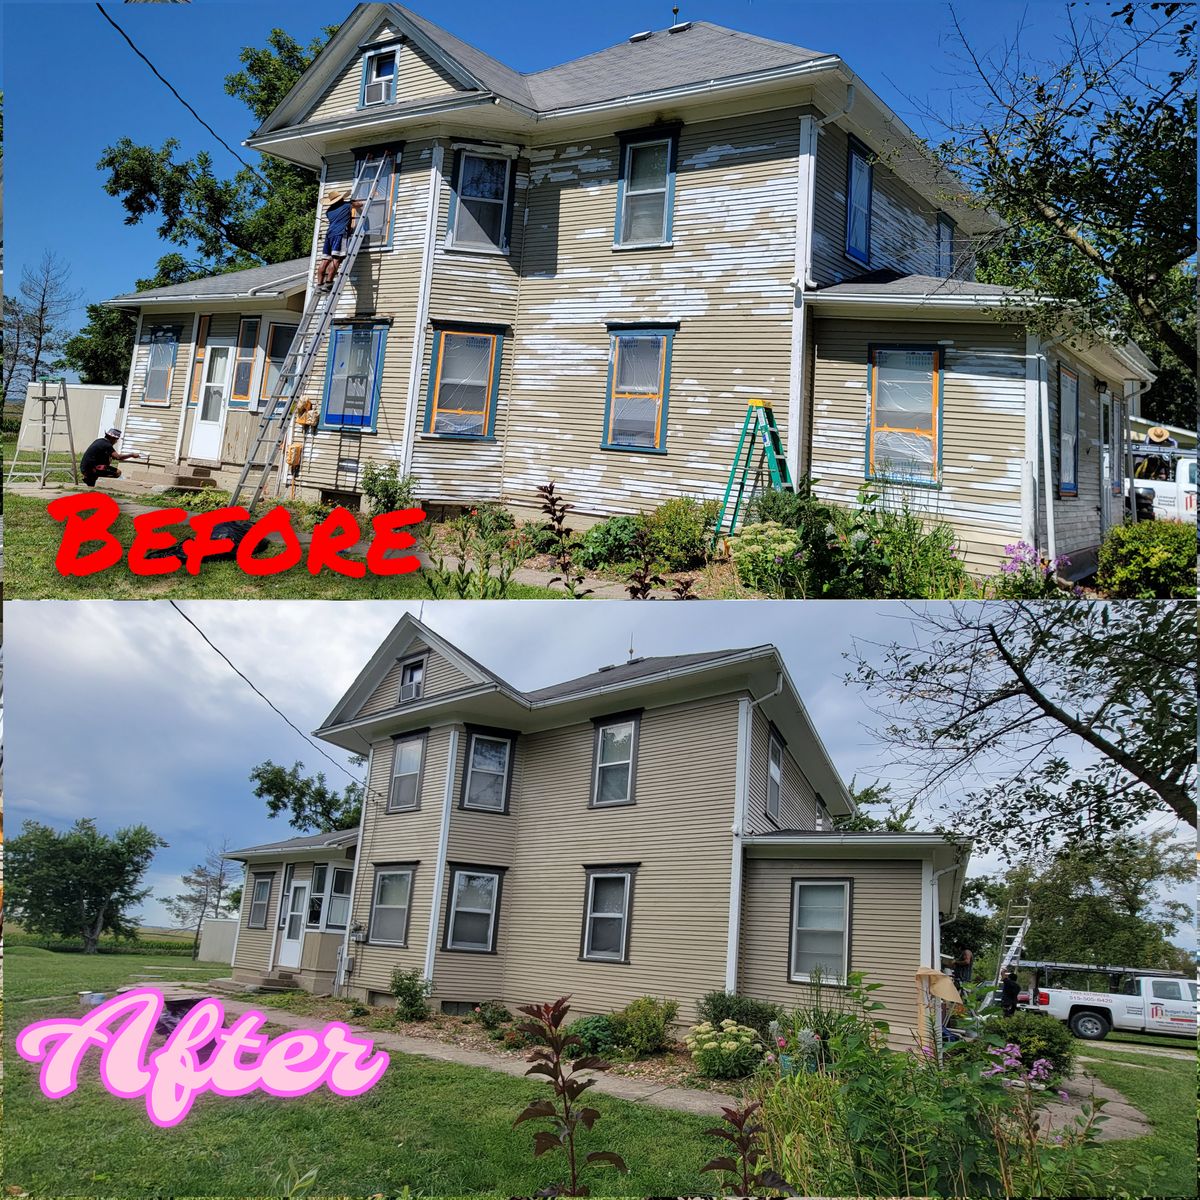 Exterior Painting for Budget Pro Painting & Remodeling LLC  in Des Moines, IA